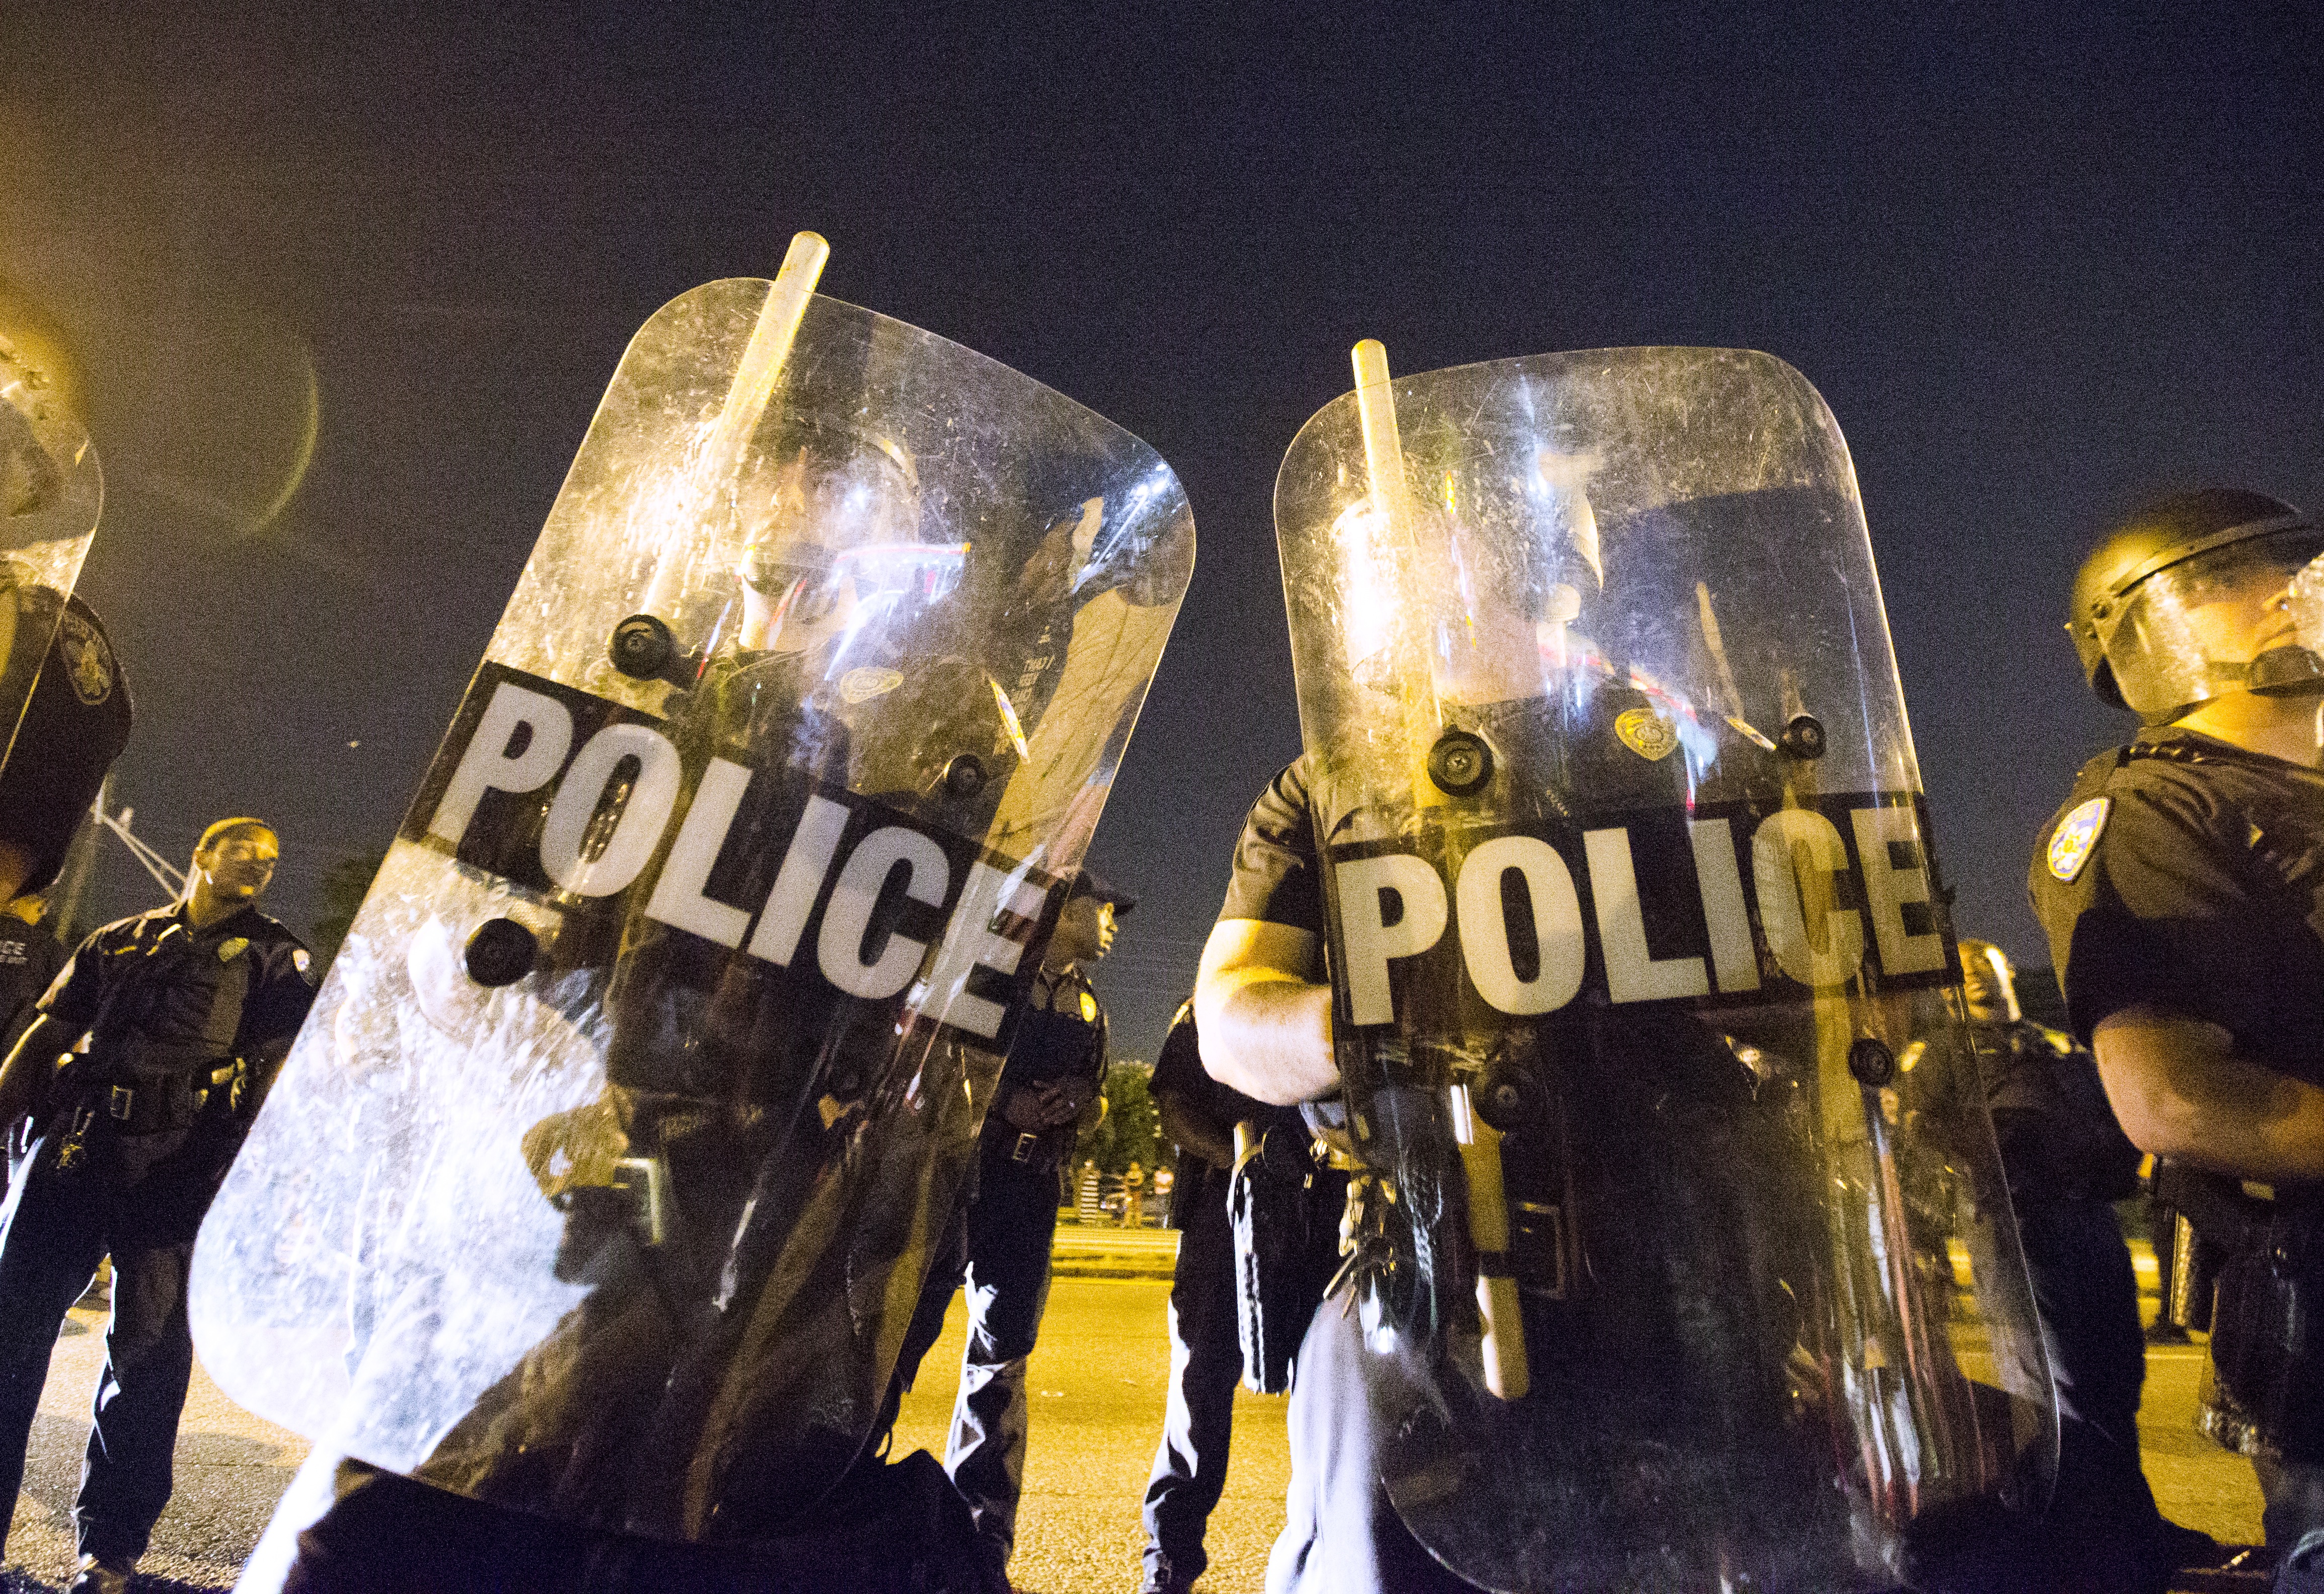 Baton Rouge police officers at a recent protest against police brutality